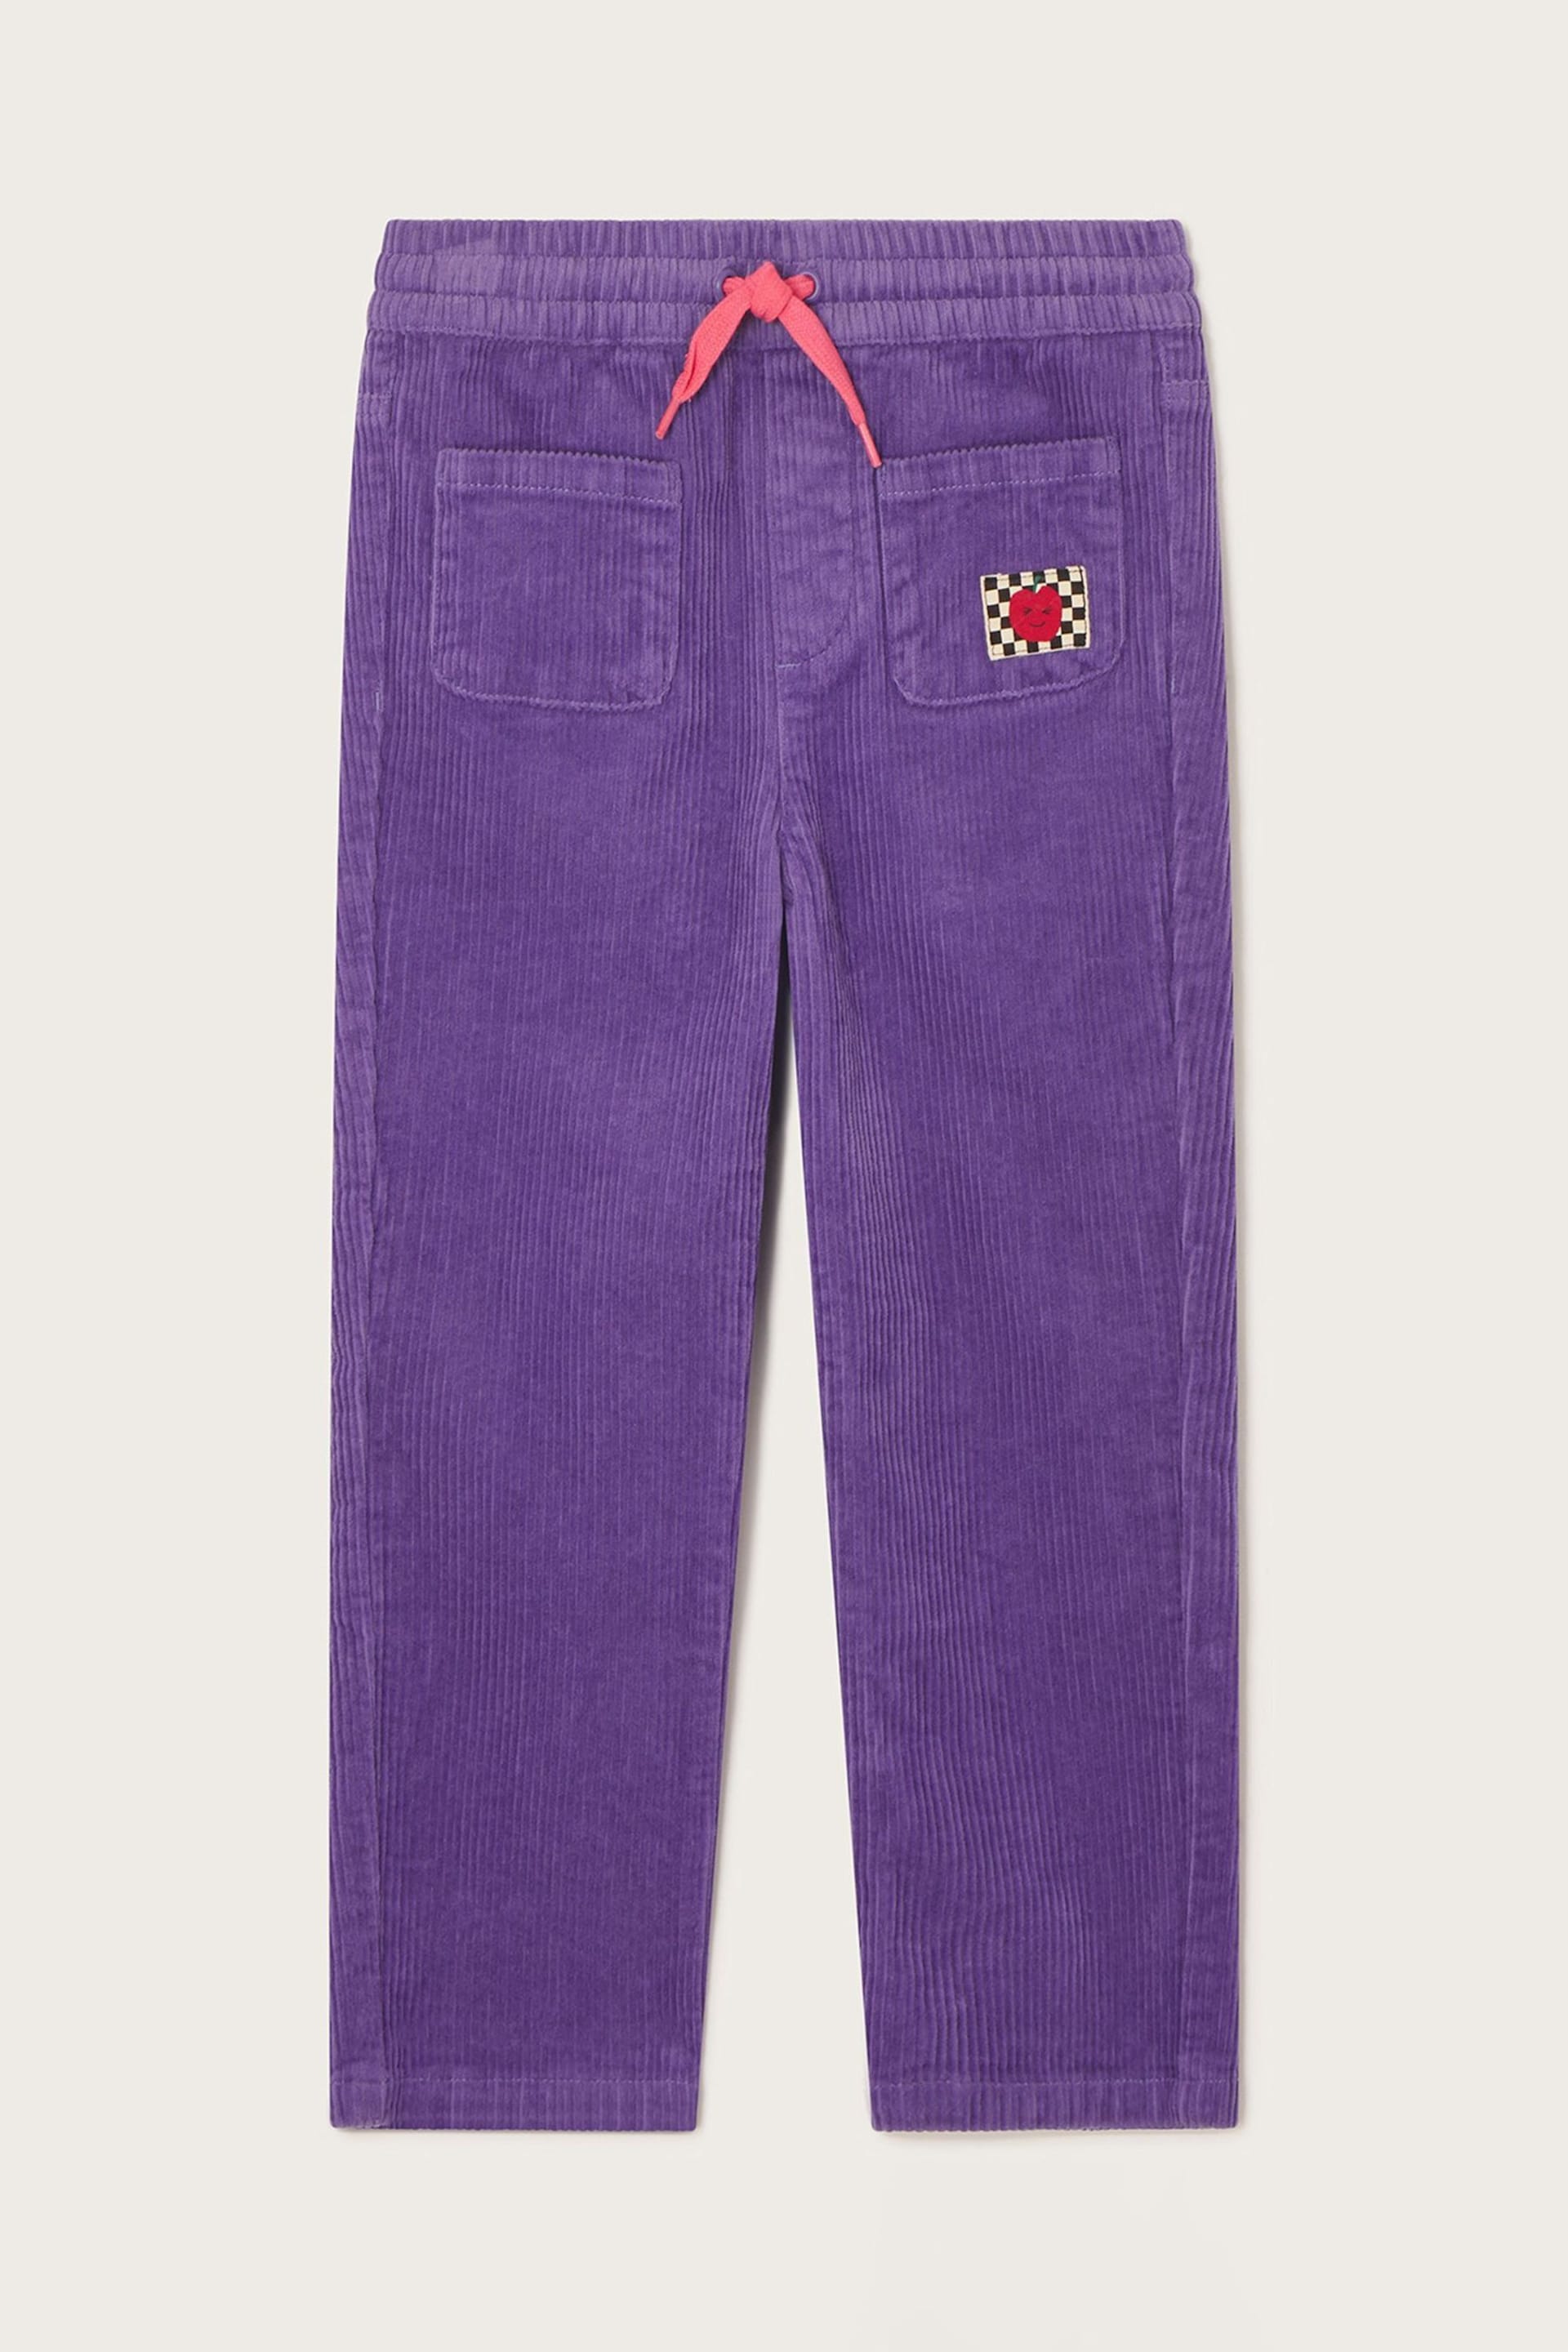 Monsoon Purple Cord Trousers - Image 1 of 3